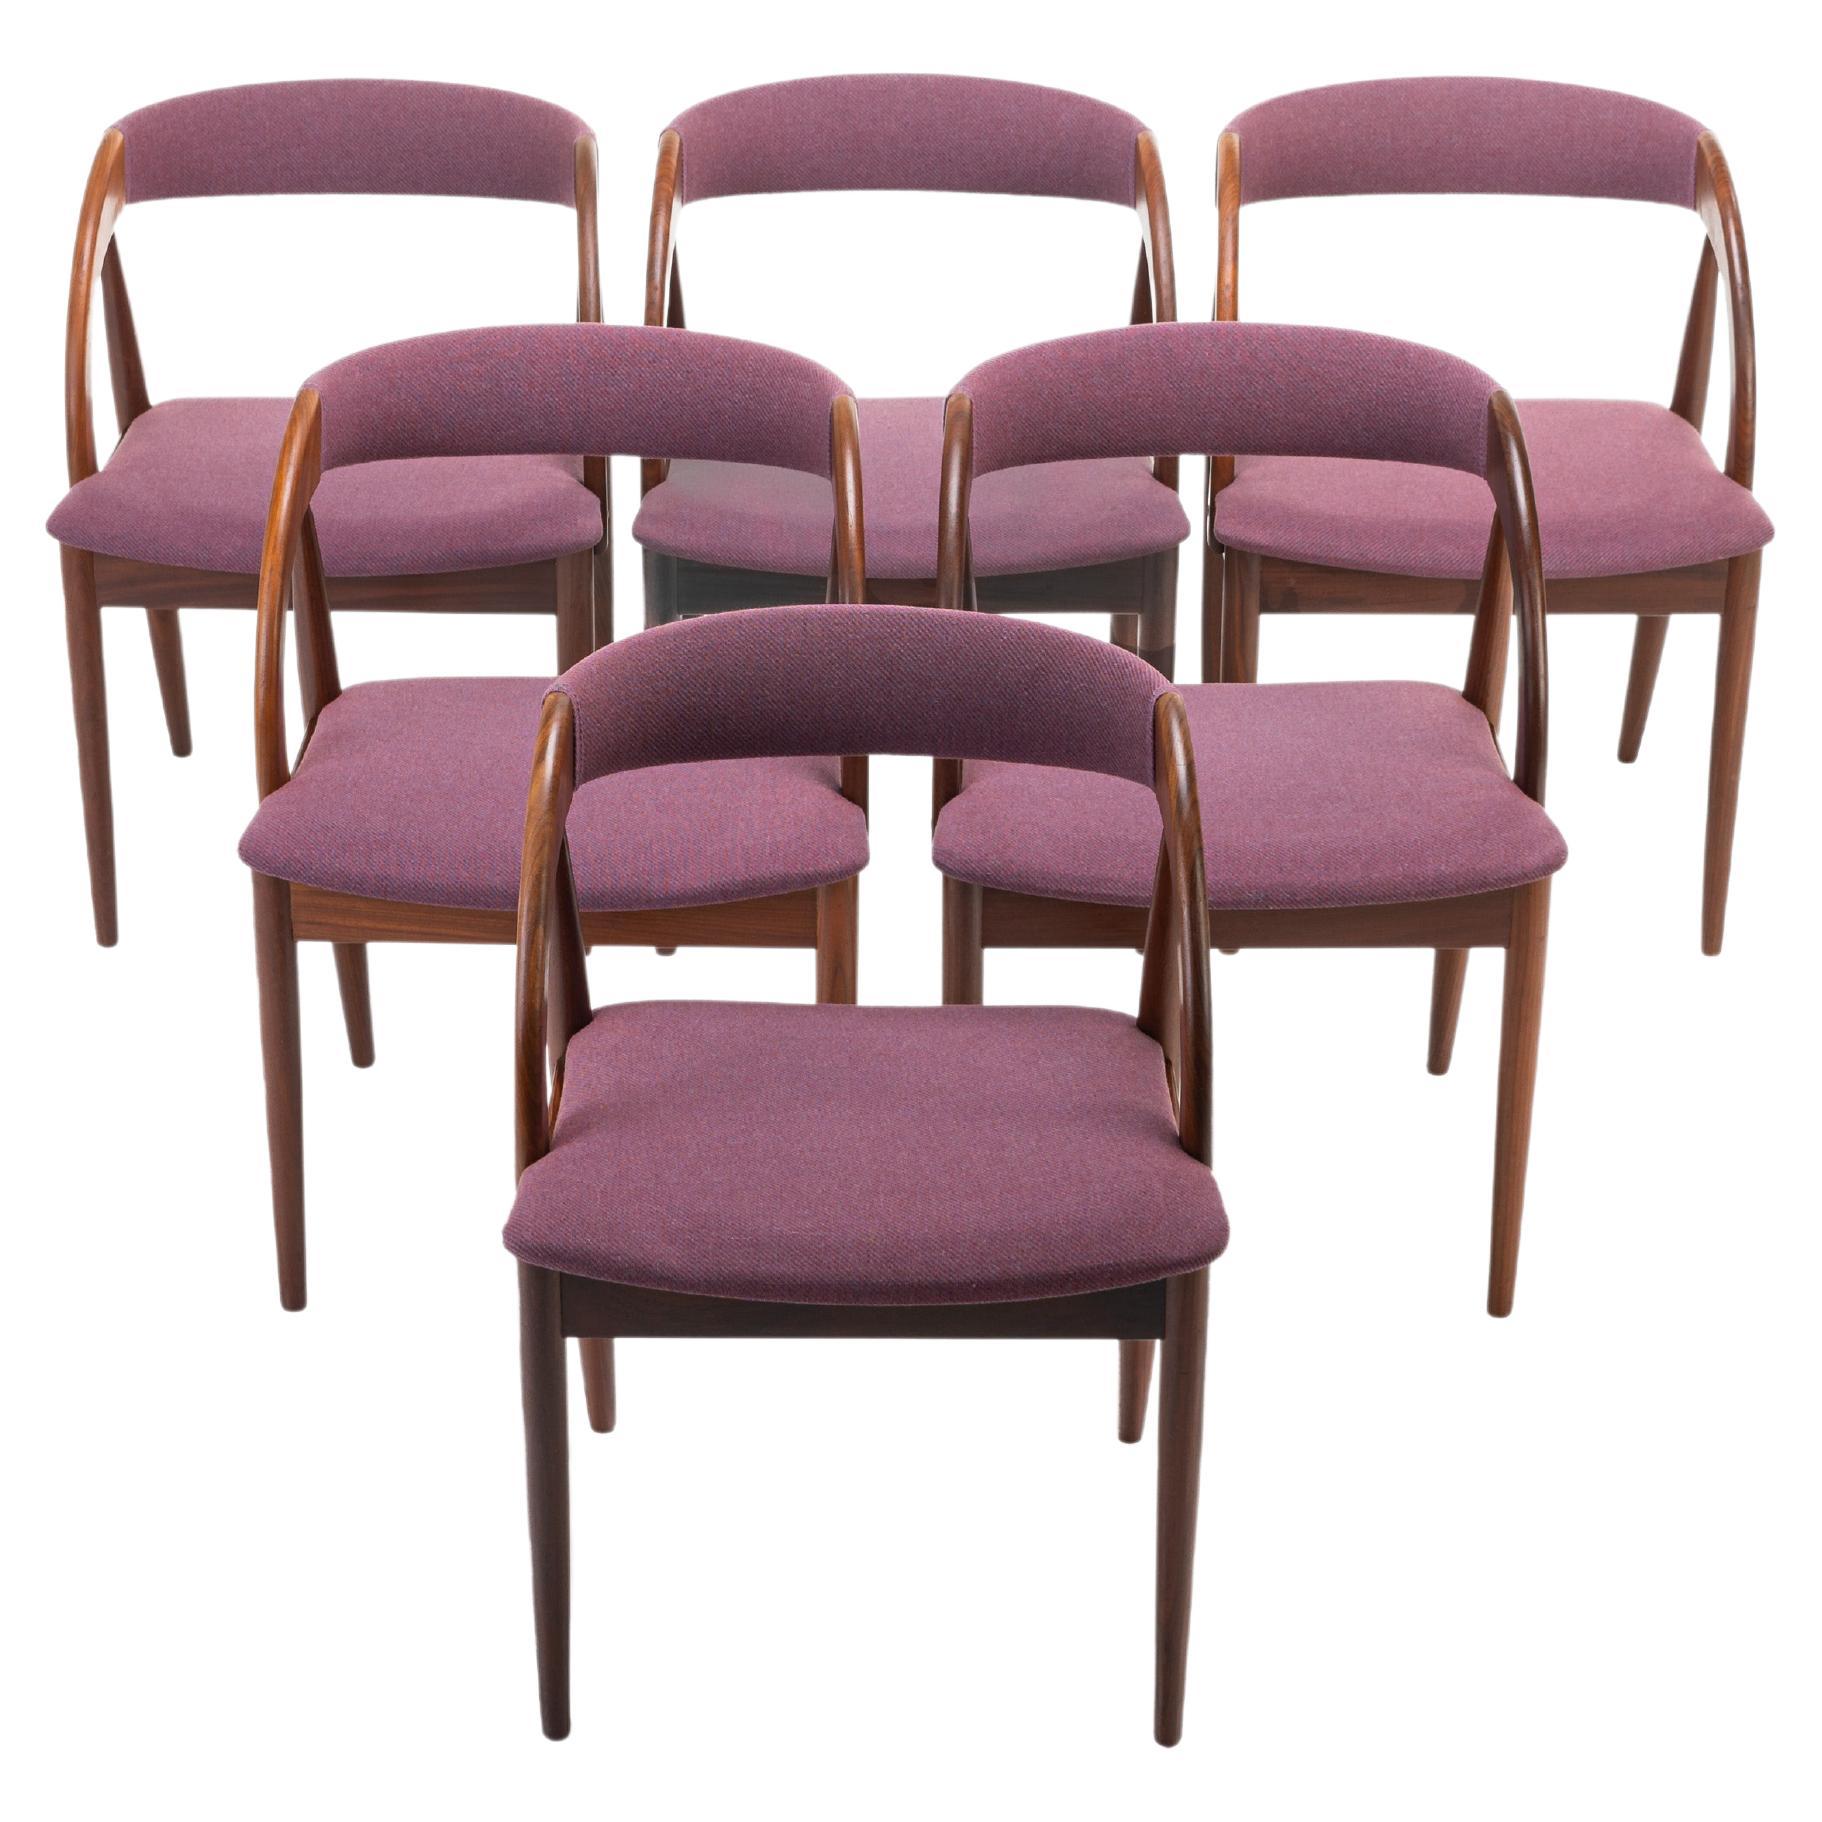 Set of 6 Dining Chairs in Teak and Purple Fabric, Denmark, 1960s